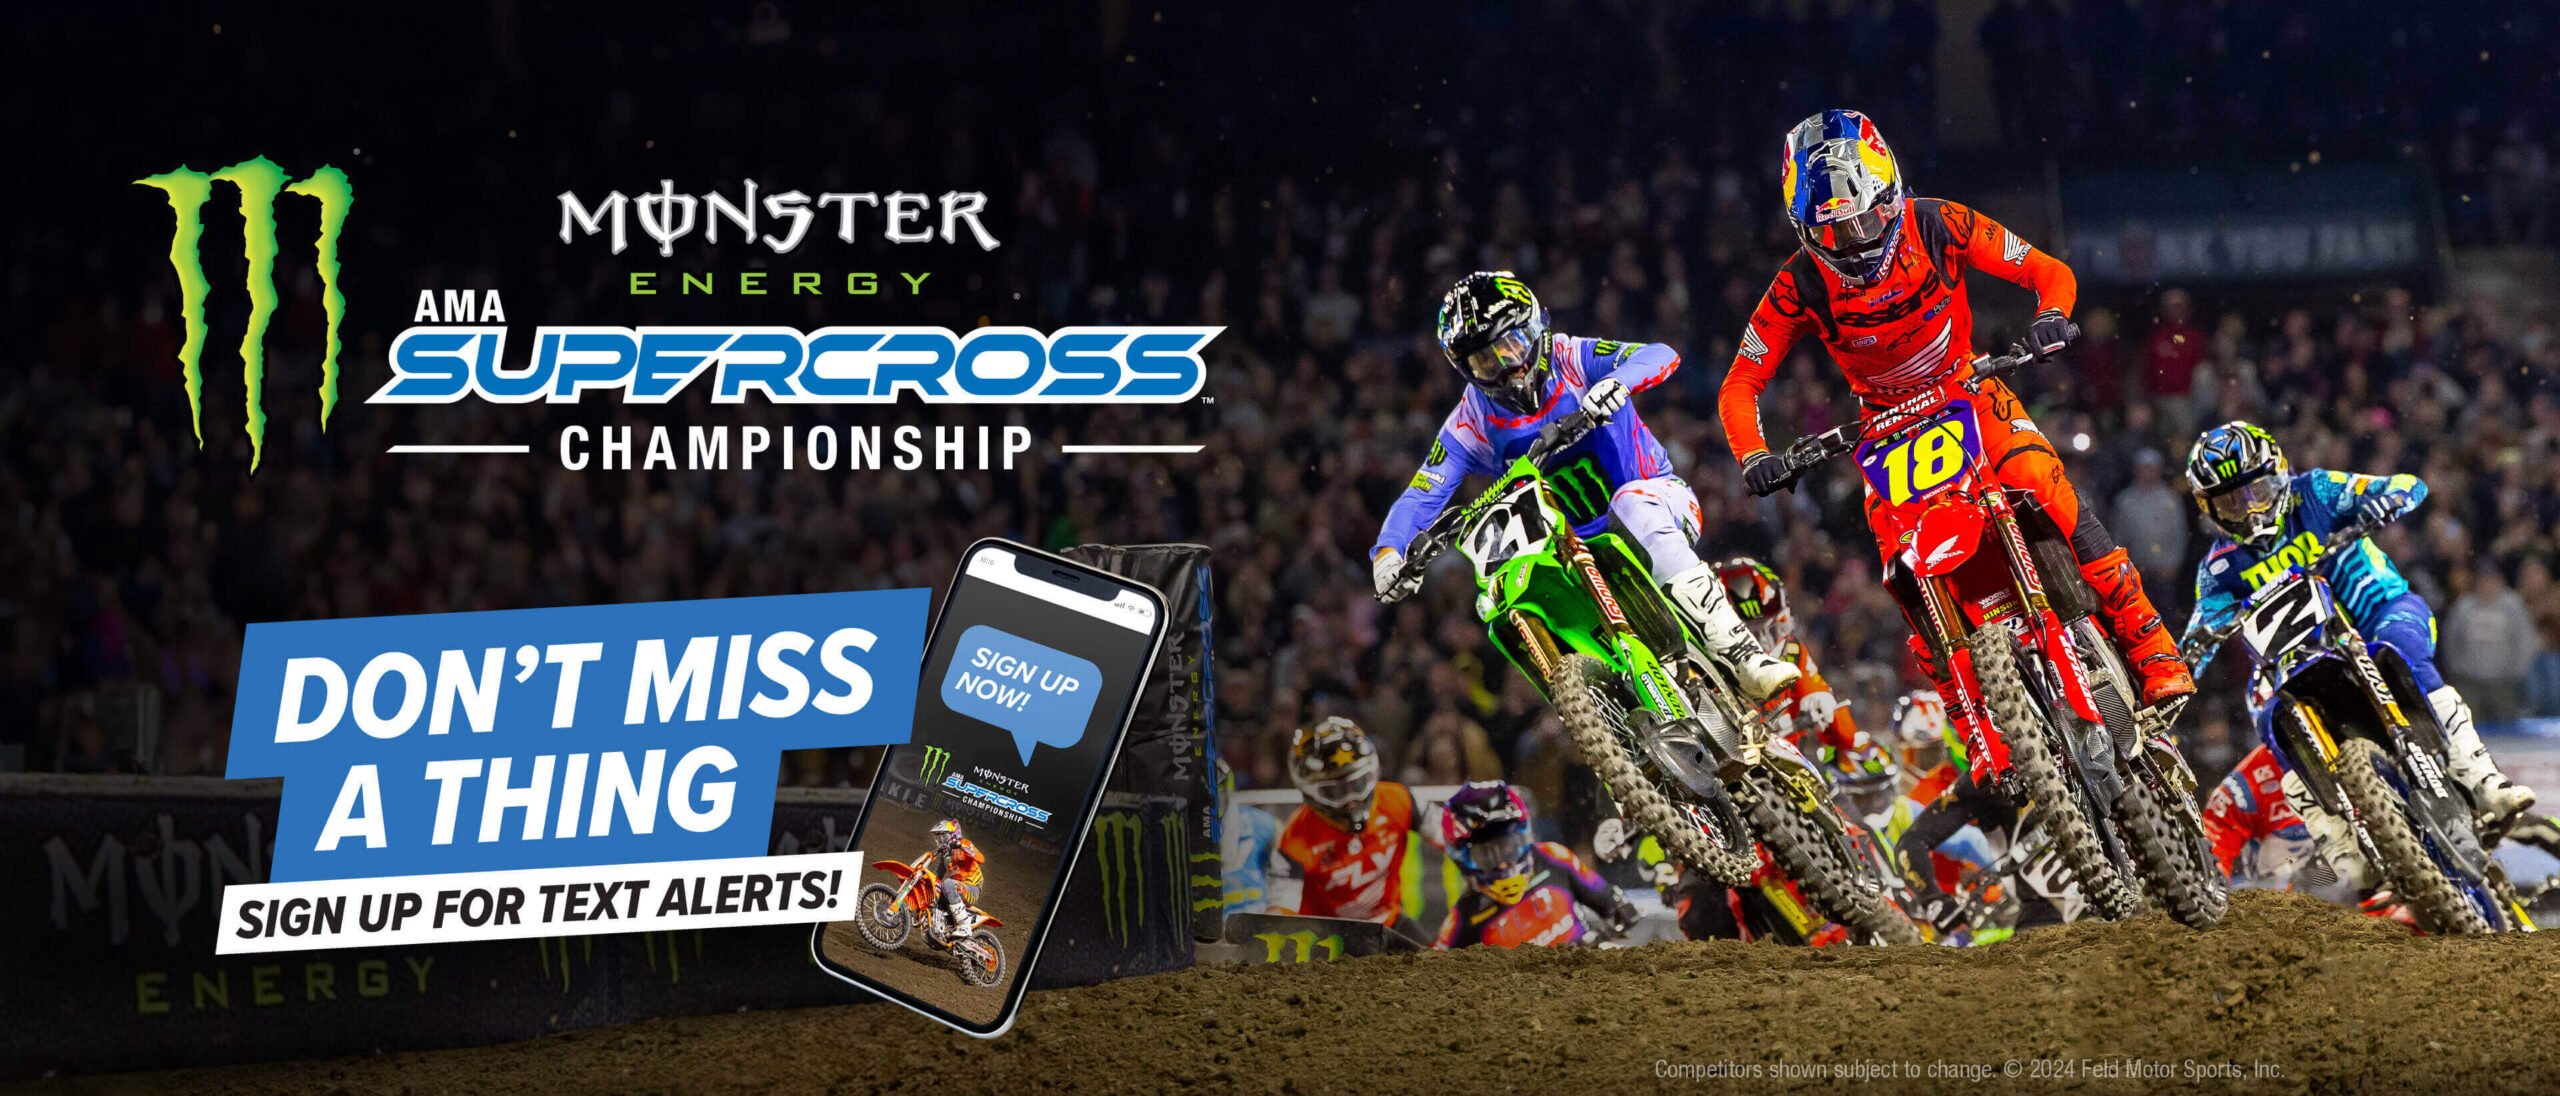 Photo of Supercross action with graphic: Monster Energy Supercross - Don't Miss a Thing - Sign up for Text Alerts